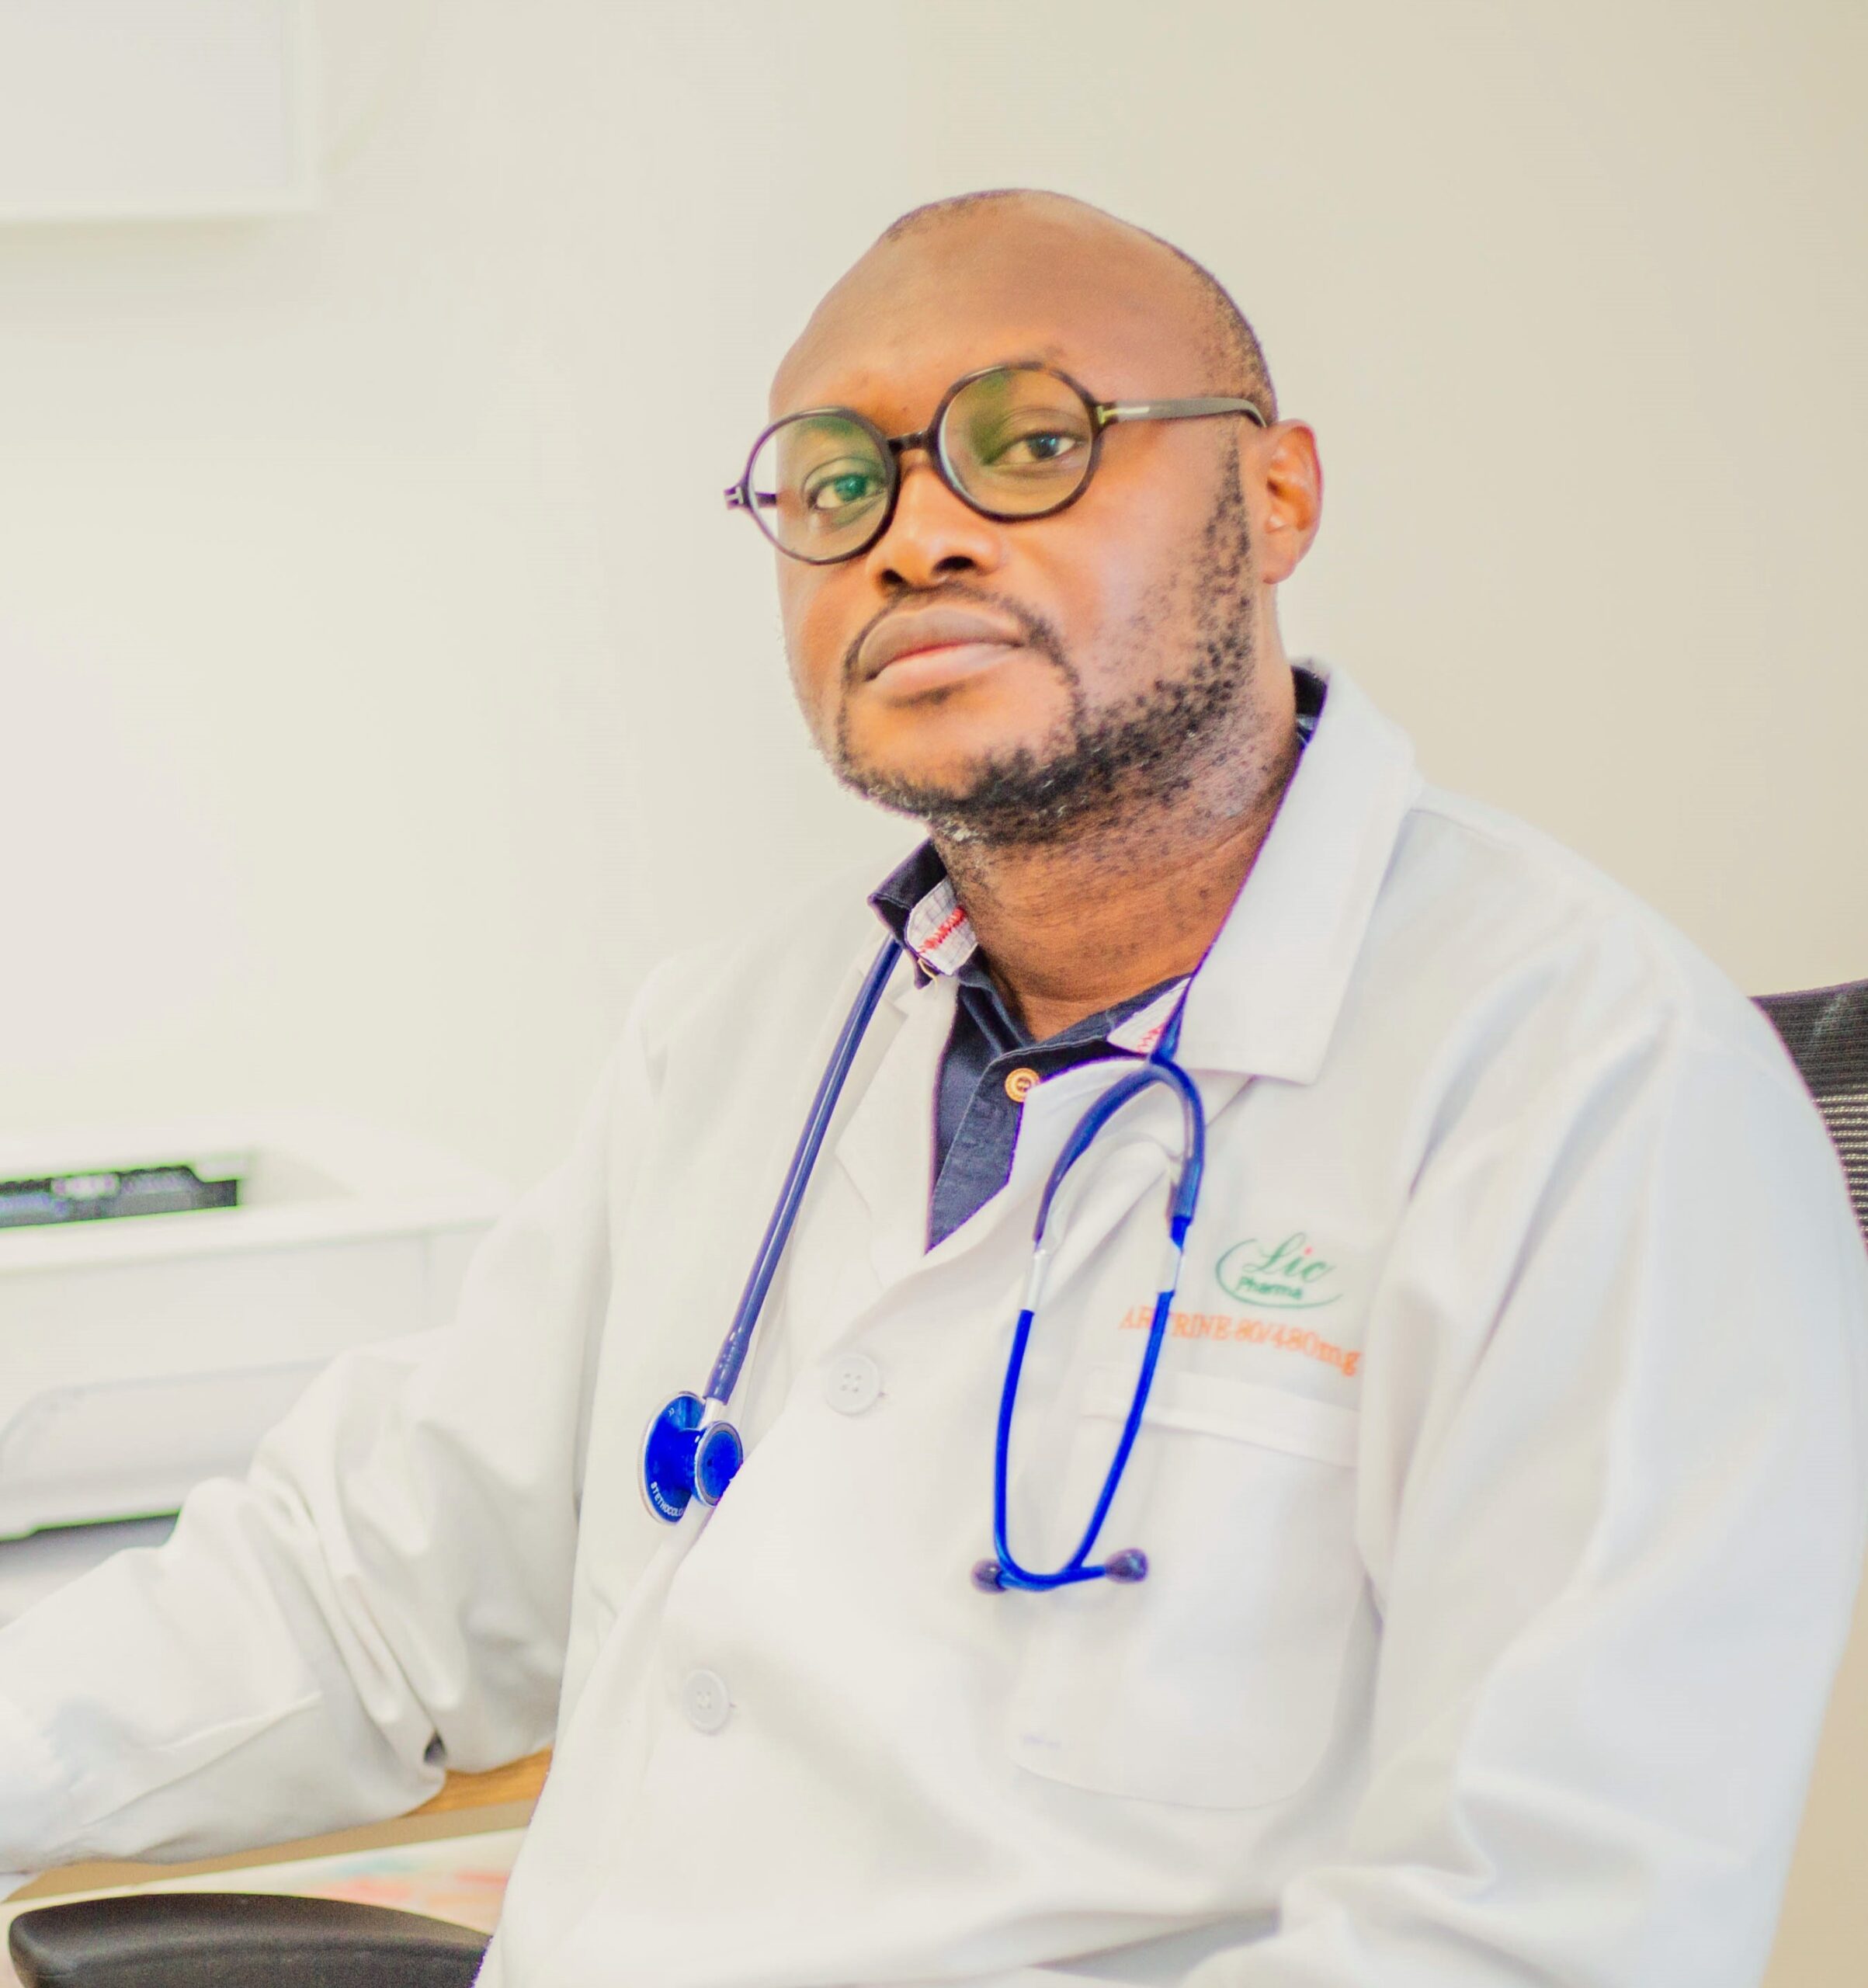 An African doctor sits at a desk, wearing a white lab coat and blue stethoscope